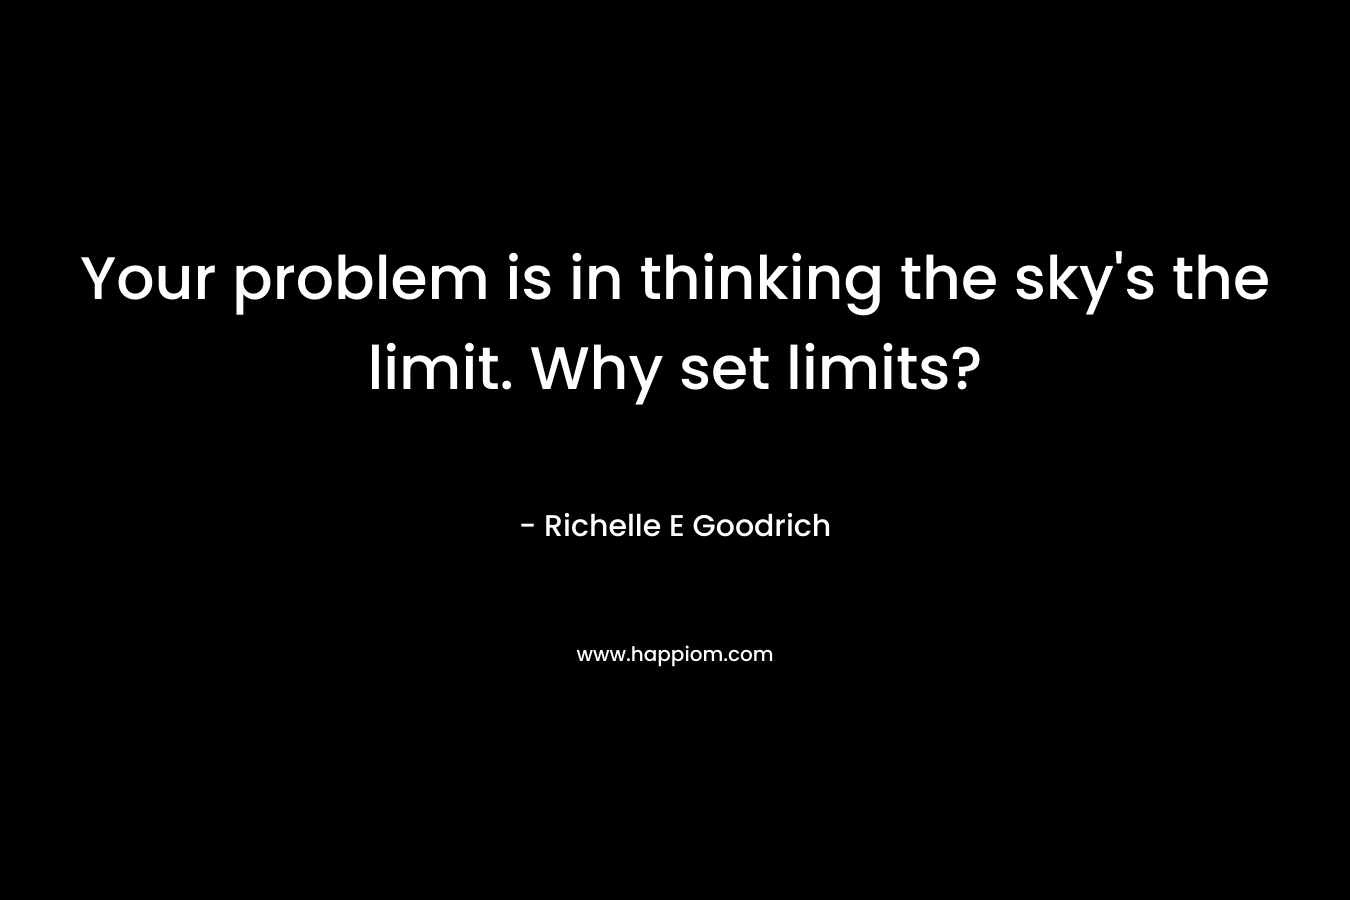 Your problem is in thinking the sky’s the limit. Why set limits? – Richelle E Goodrich